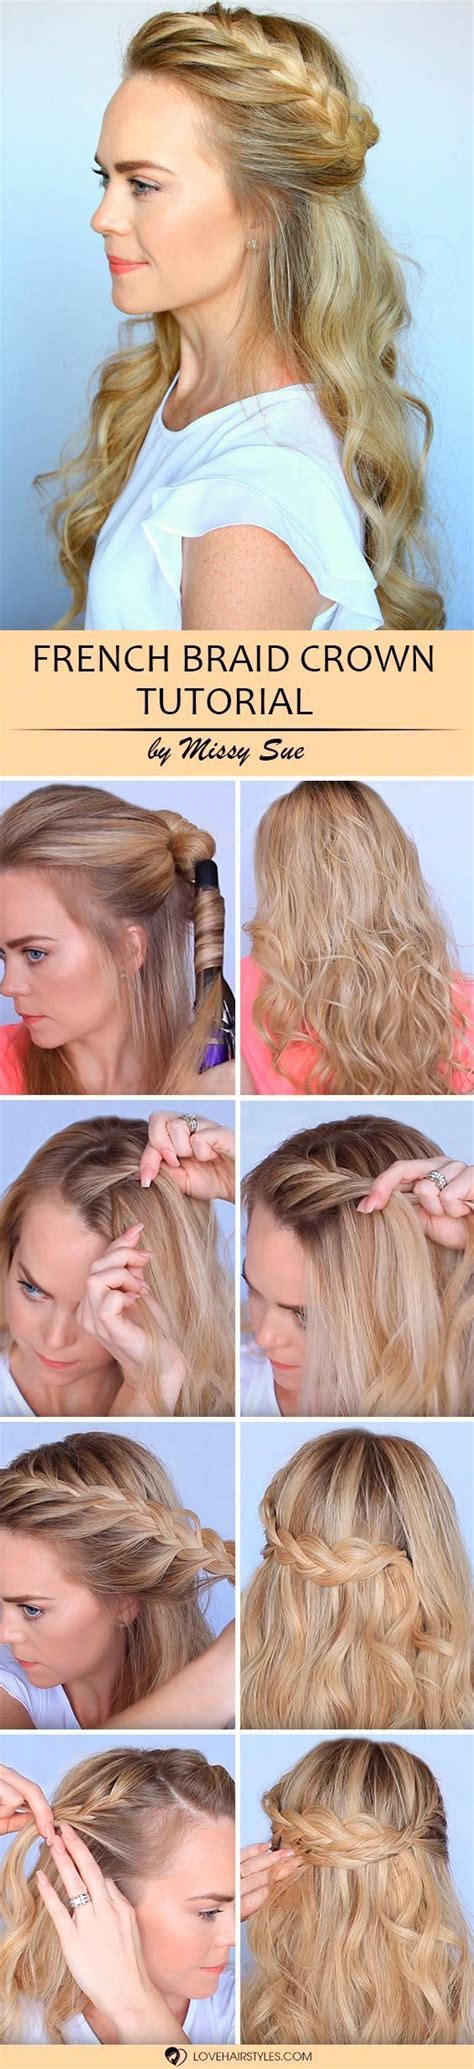 How to braid your own hair with extensions for beginners. 26 Simple Tutorials To Braid Your Own Hair Perfectly | LoveHairStyles.com | Braiding your own ...